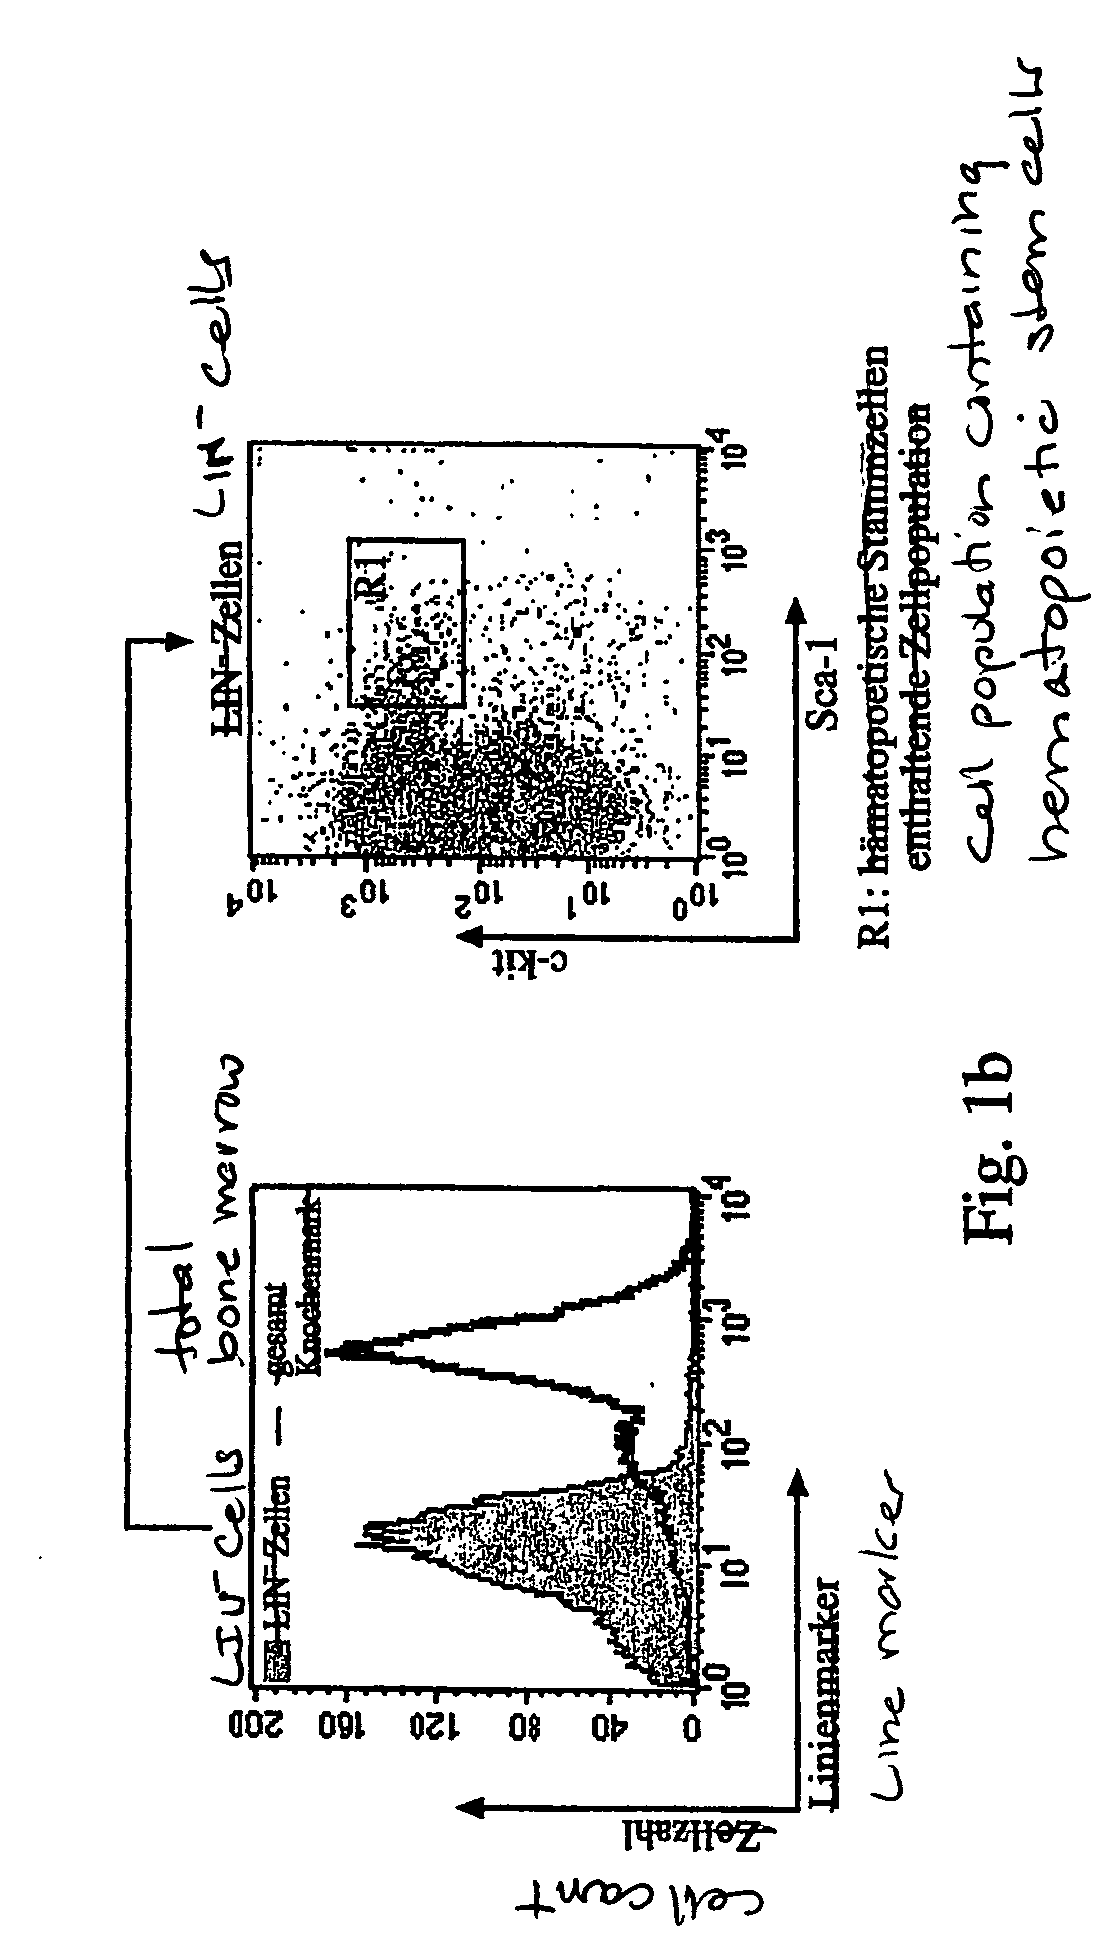 Method for producing stem cells with increased developmental potential